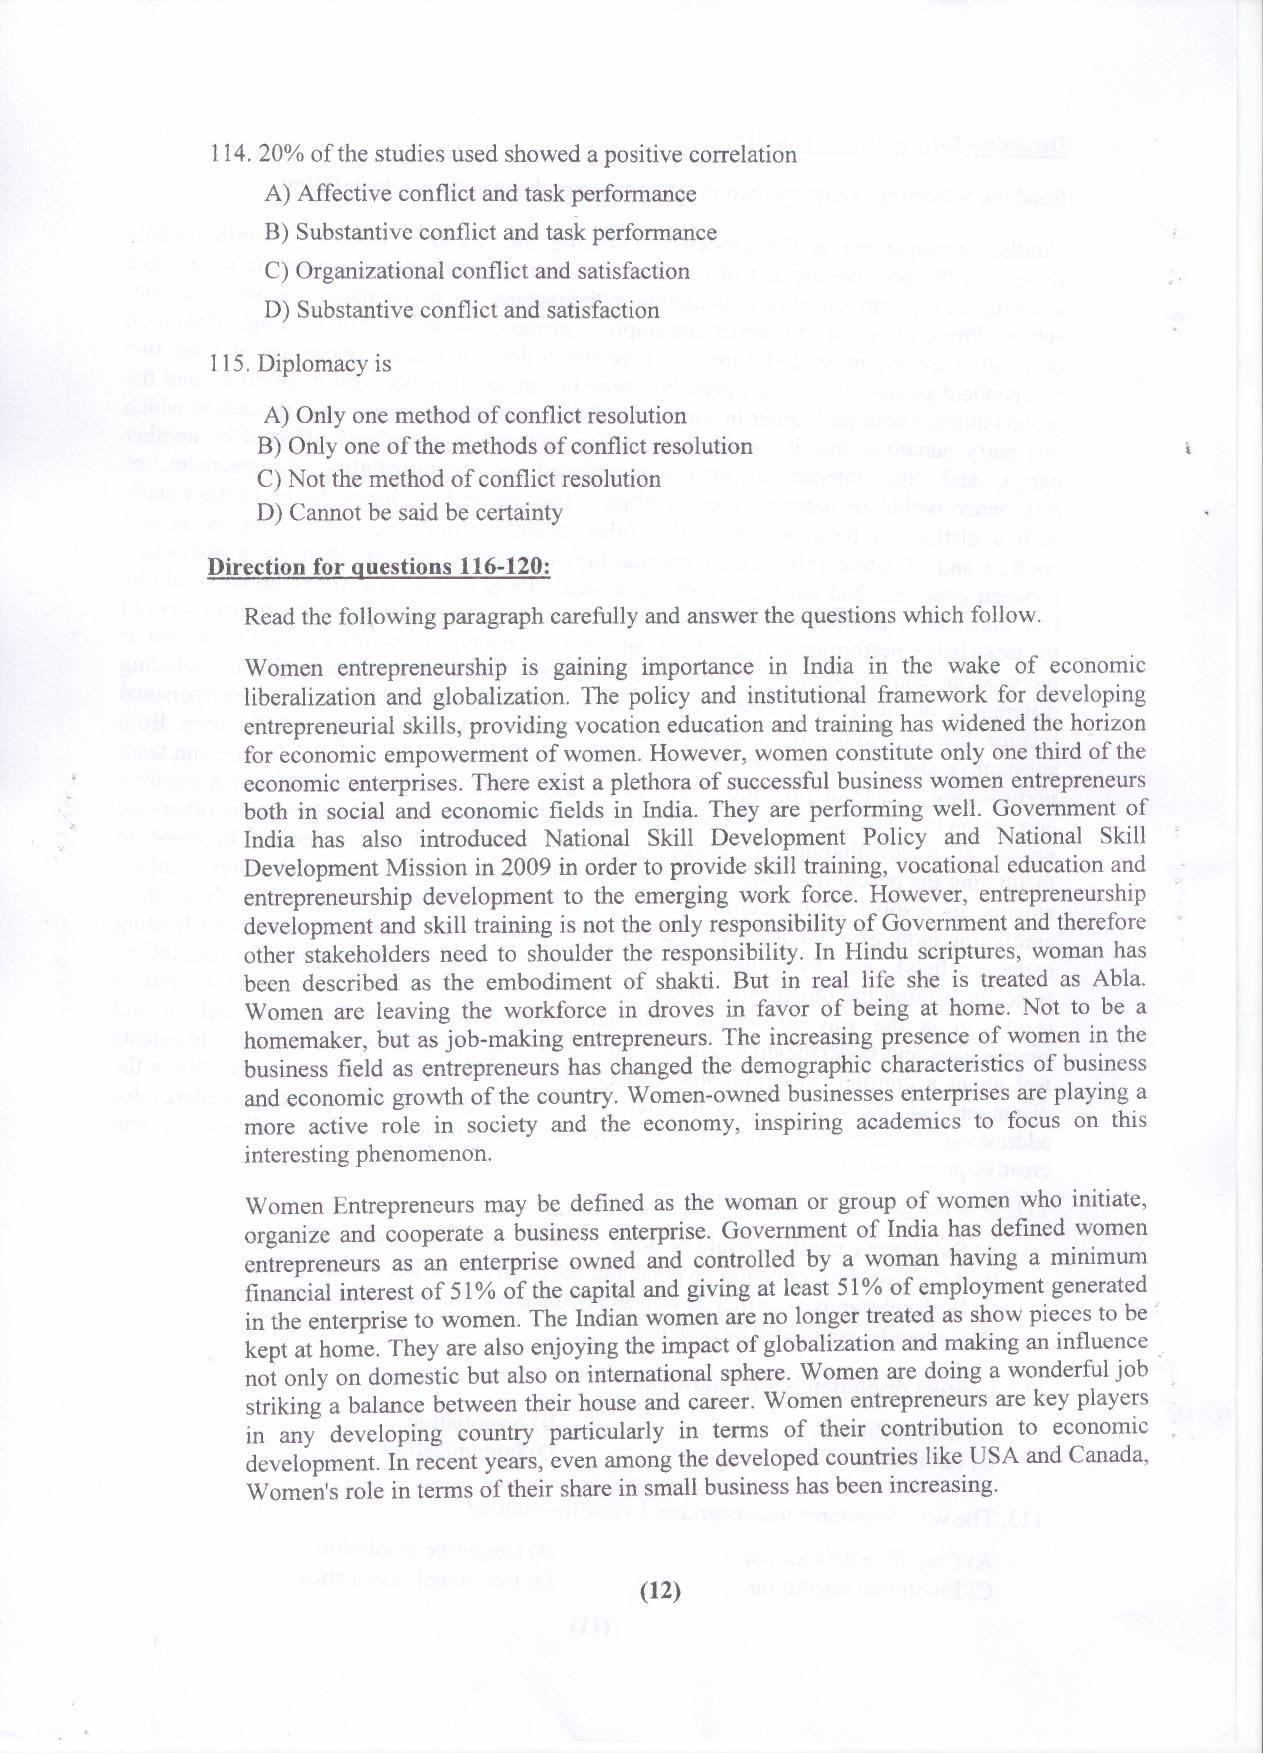 PU MET 2015 Question Booklet with Key - Page 13